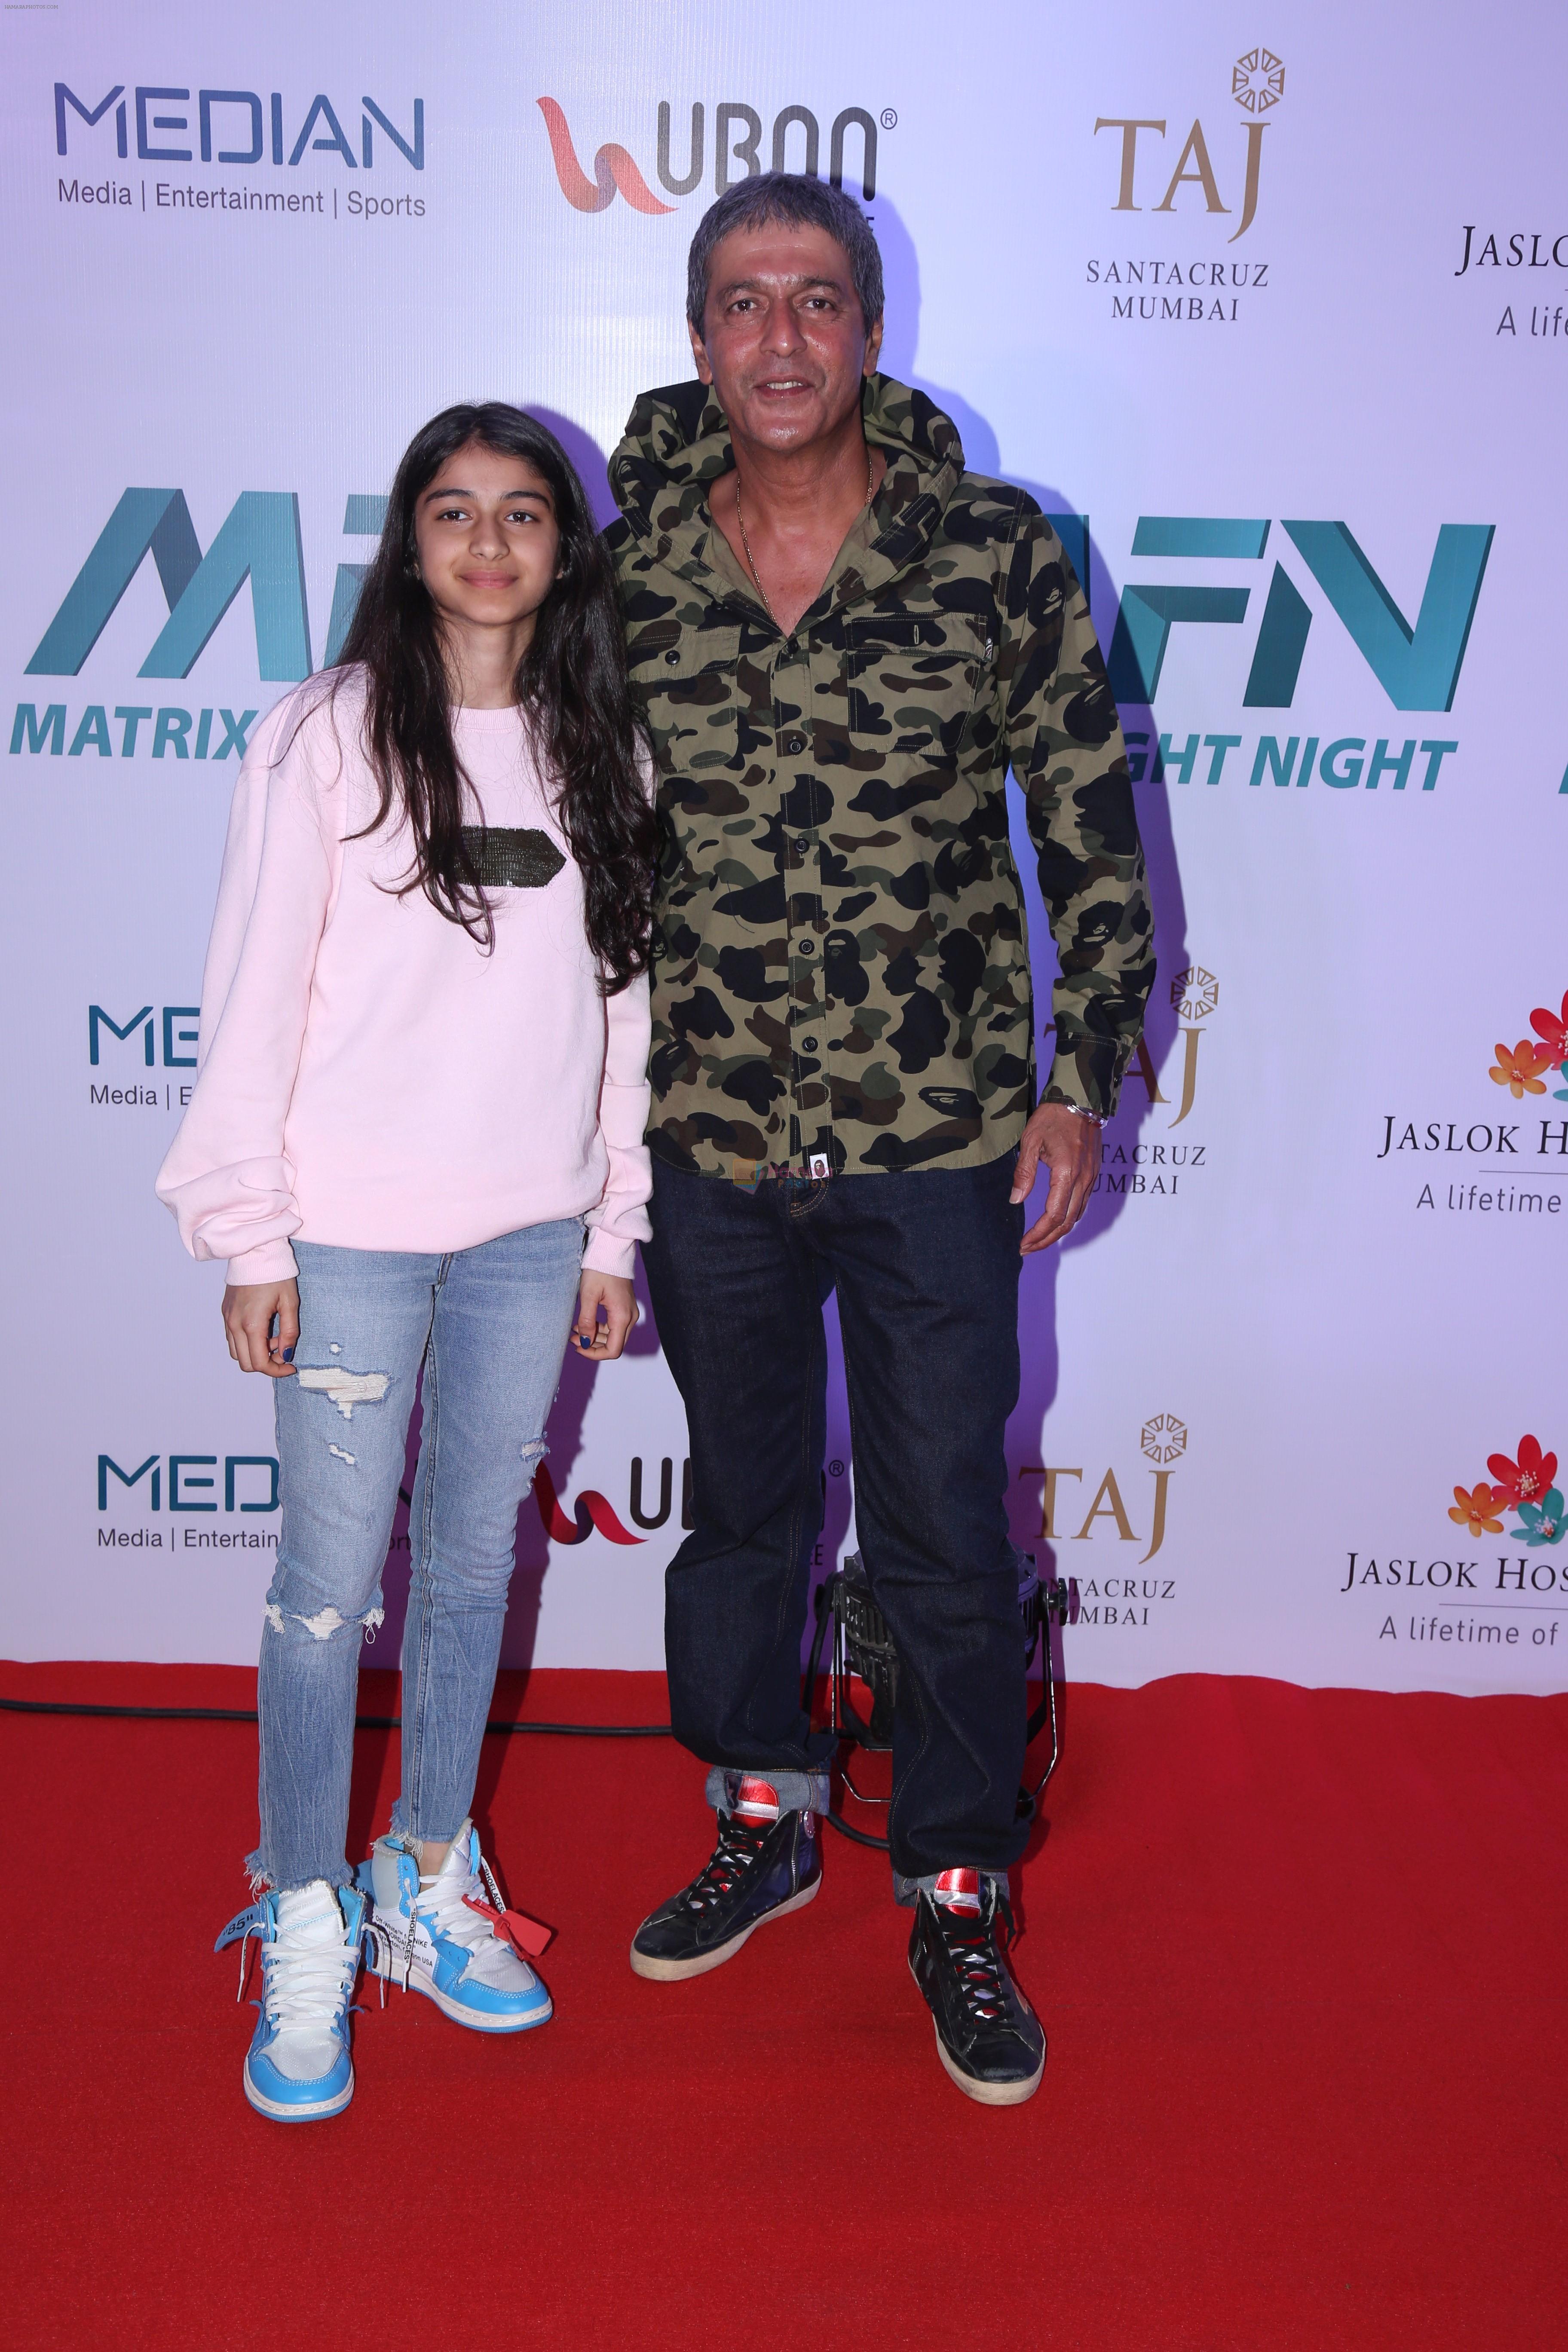 Chunky Pandey at the Launch of Matrix Fight Night by Tiger & Krishna Shroff at NSCI worli on 12th March 2019